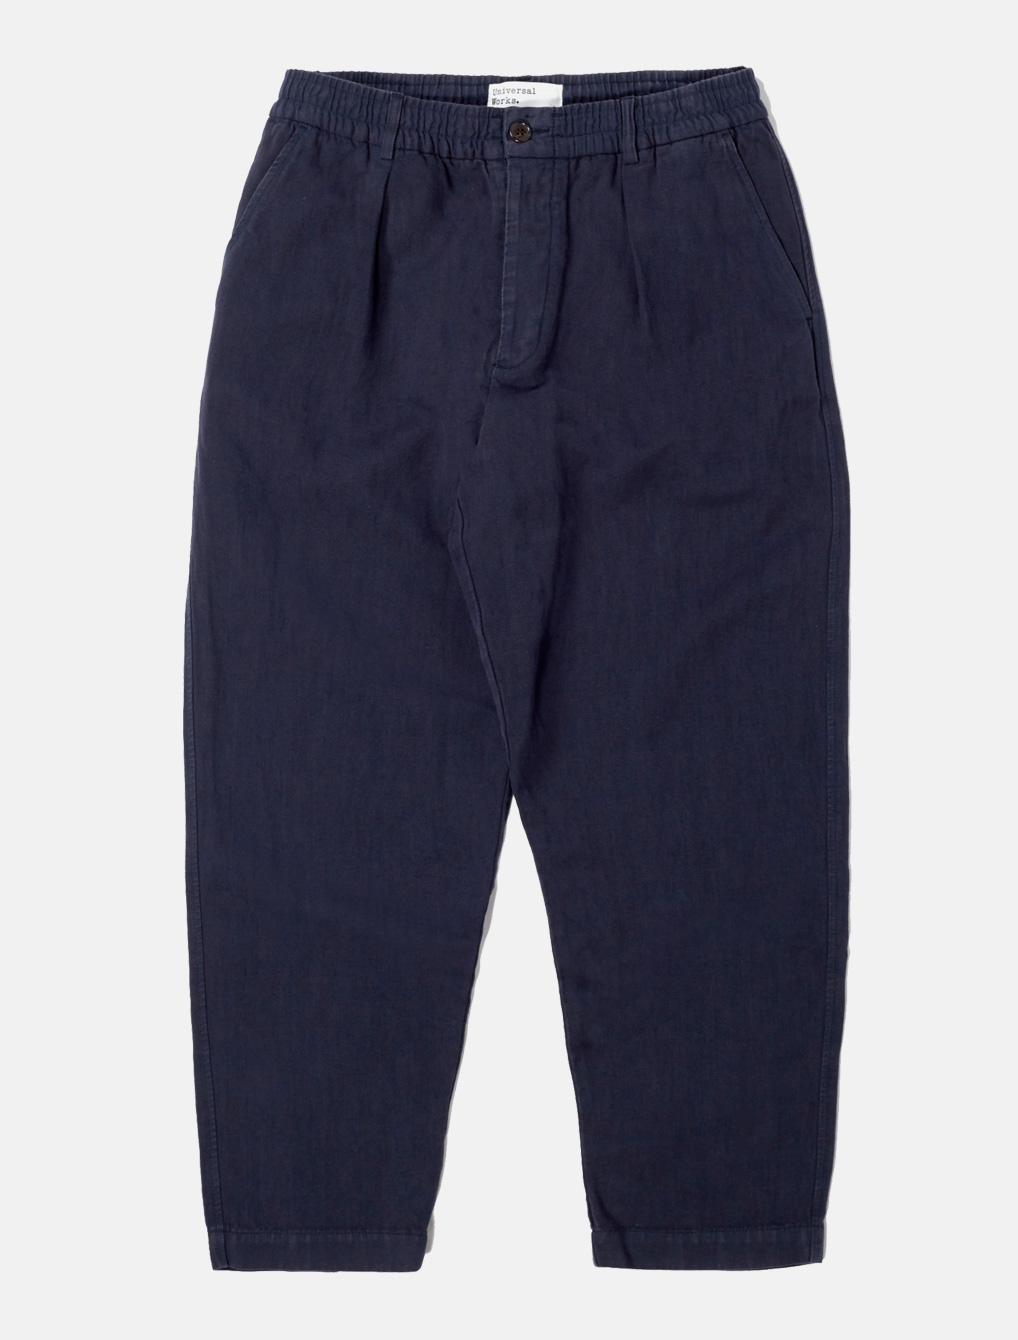 UNIVERSAL WORKS HI WATER TROUSERS NAVY TWILL - UNIFORM RESEARCH